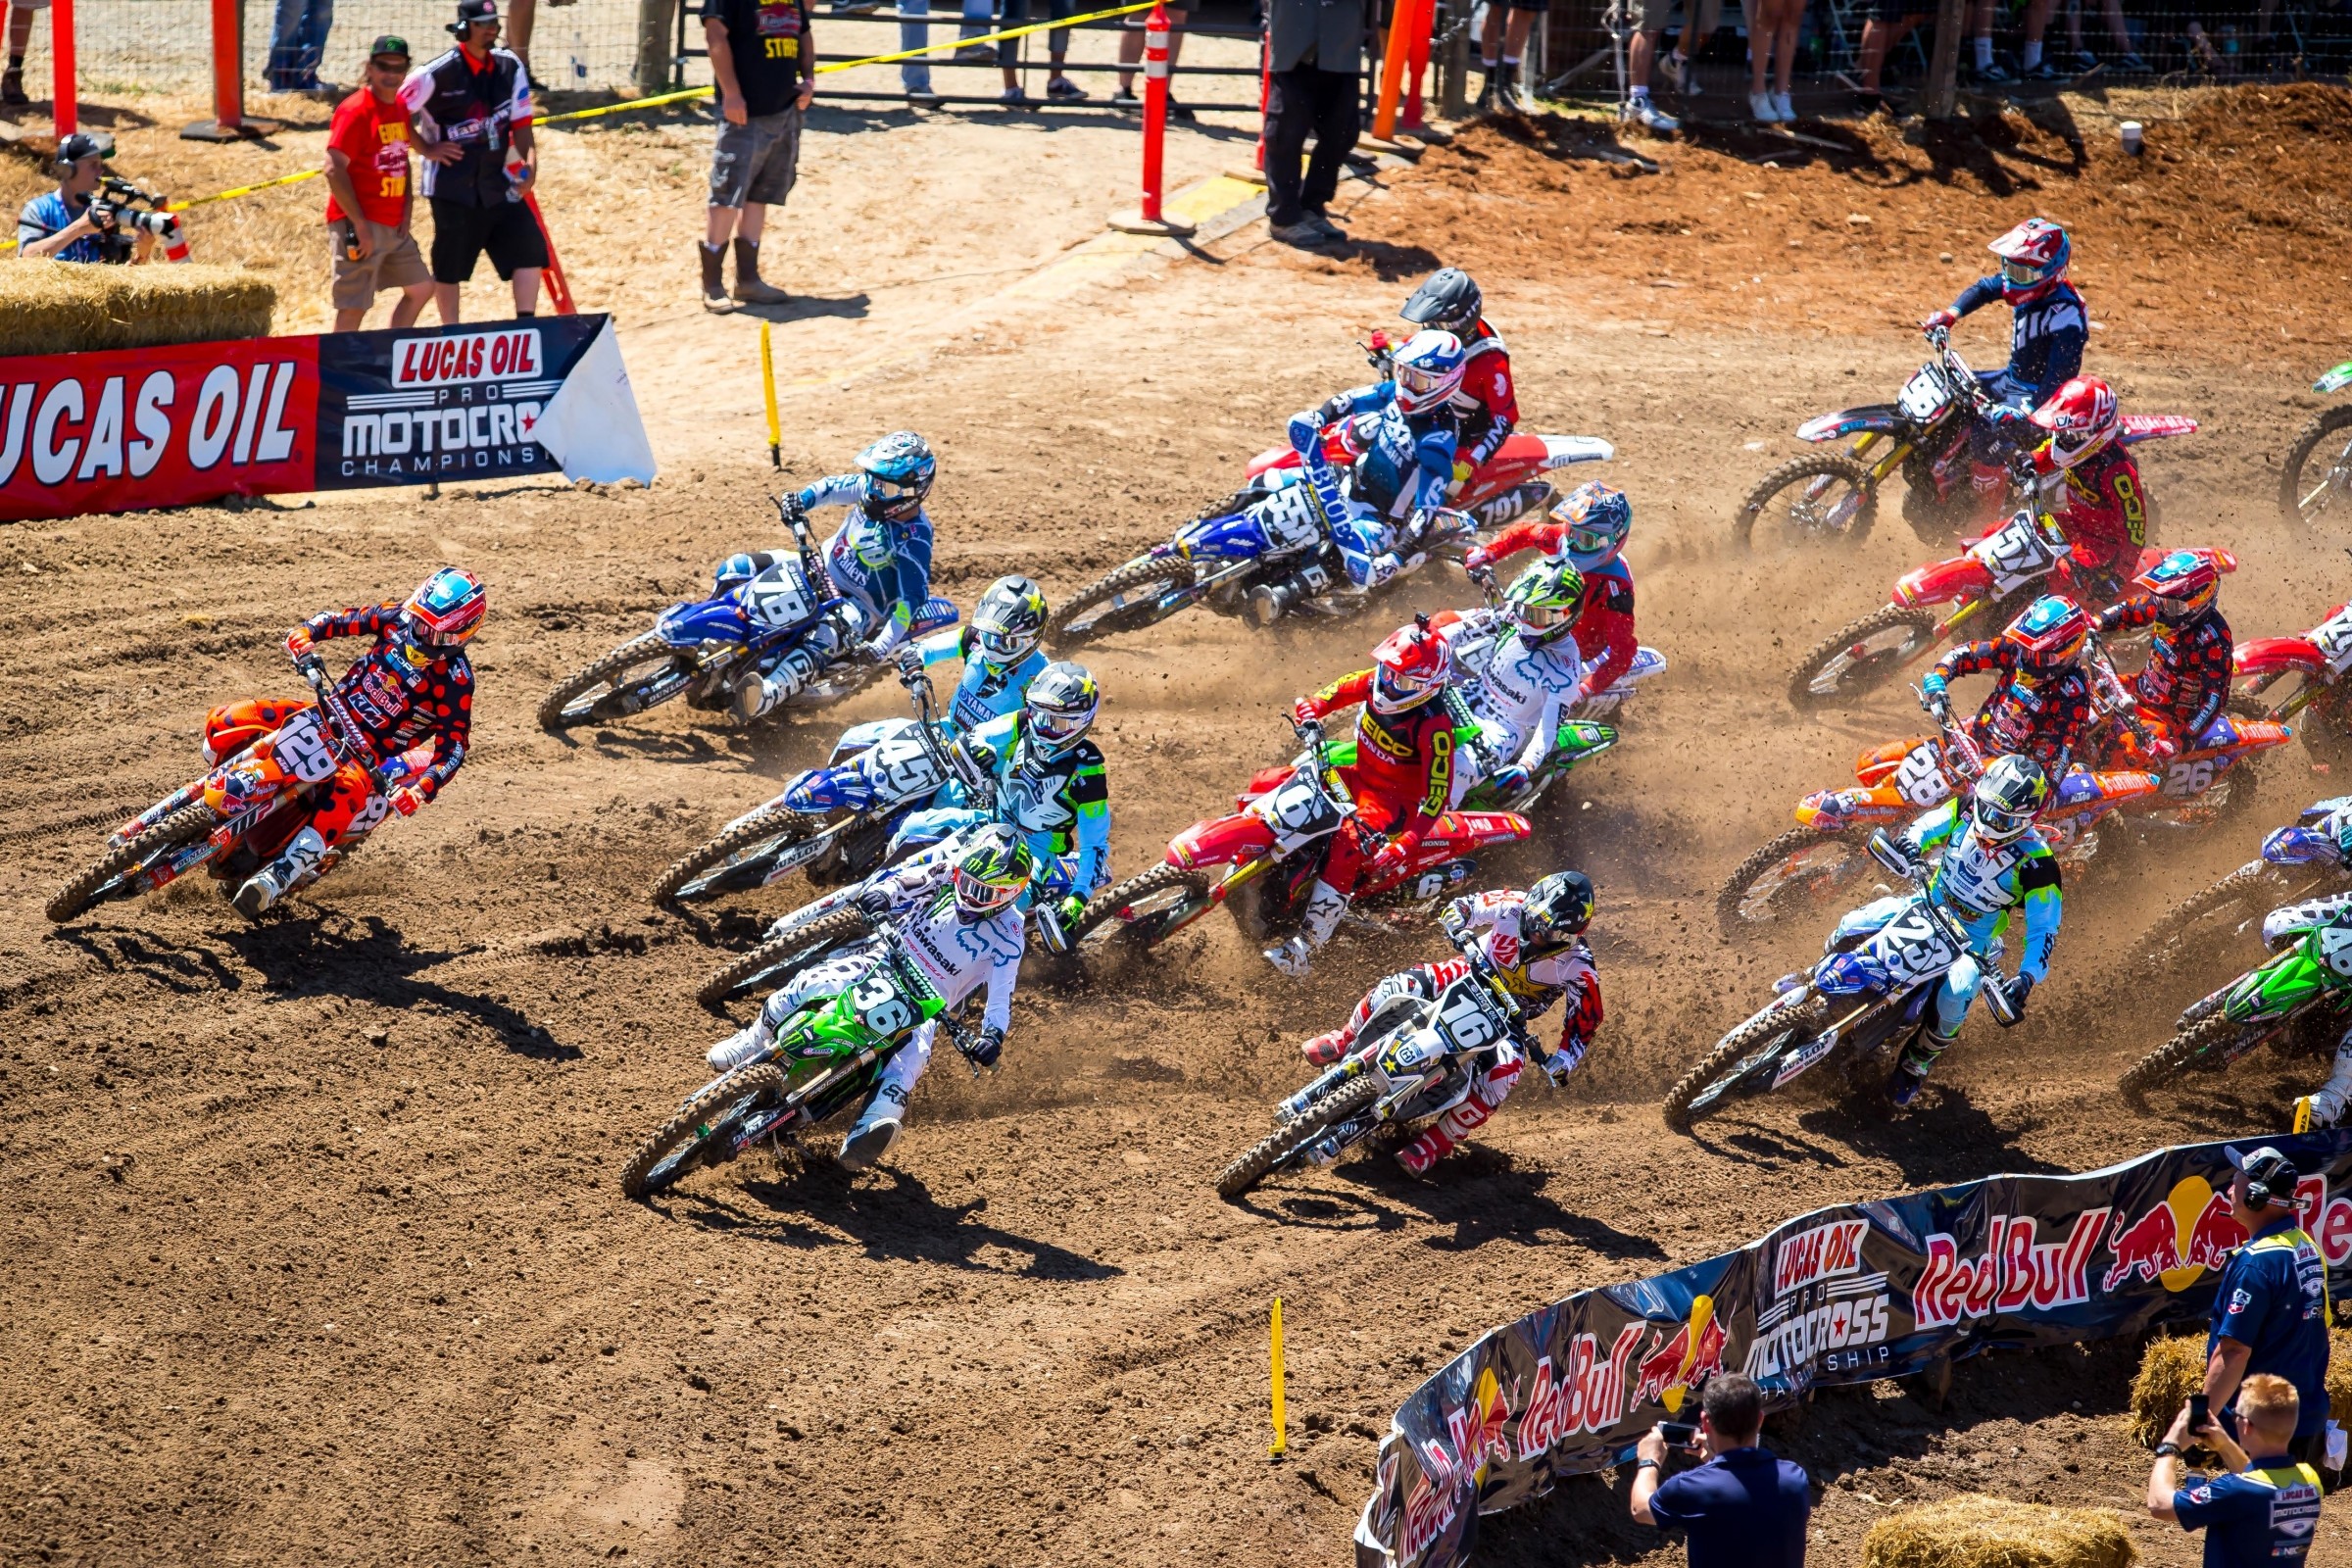 Lucas Oil Pro Motocross Championship Boasts More Than 6M in Prize